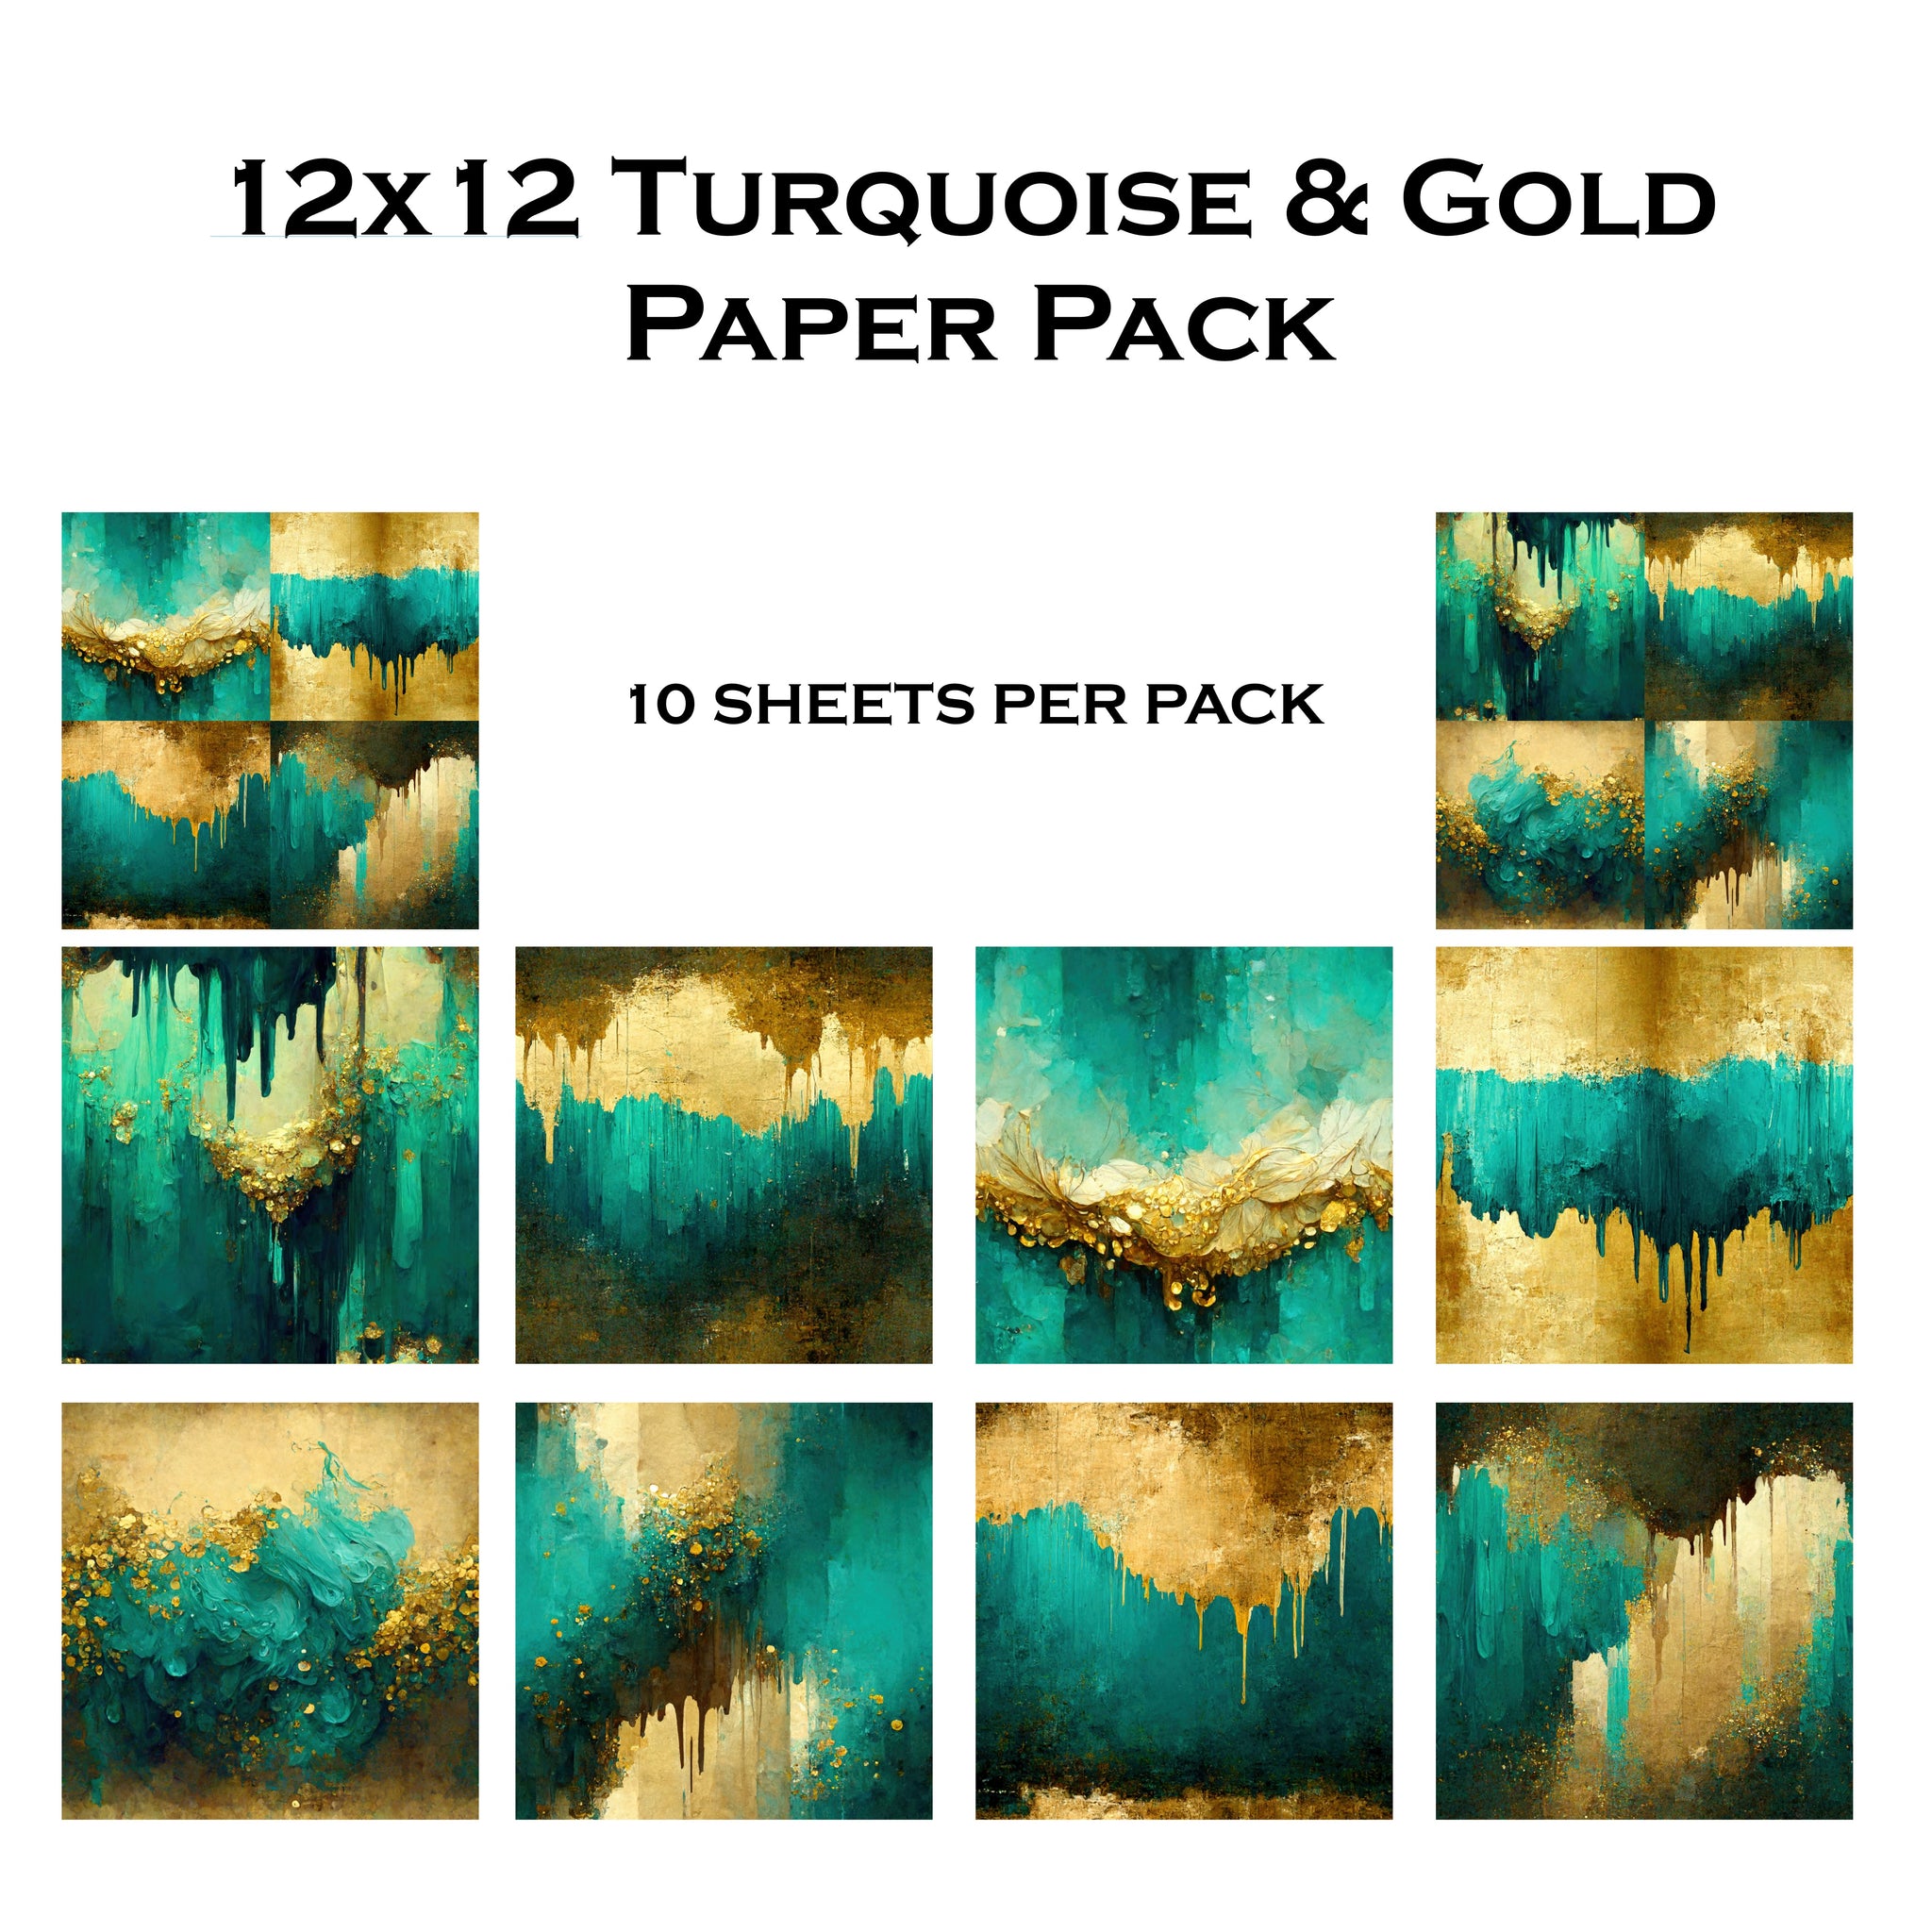 Turquoise & Gold 12x12 Paper Pack